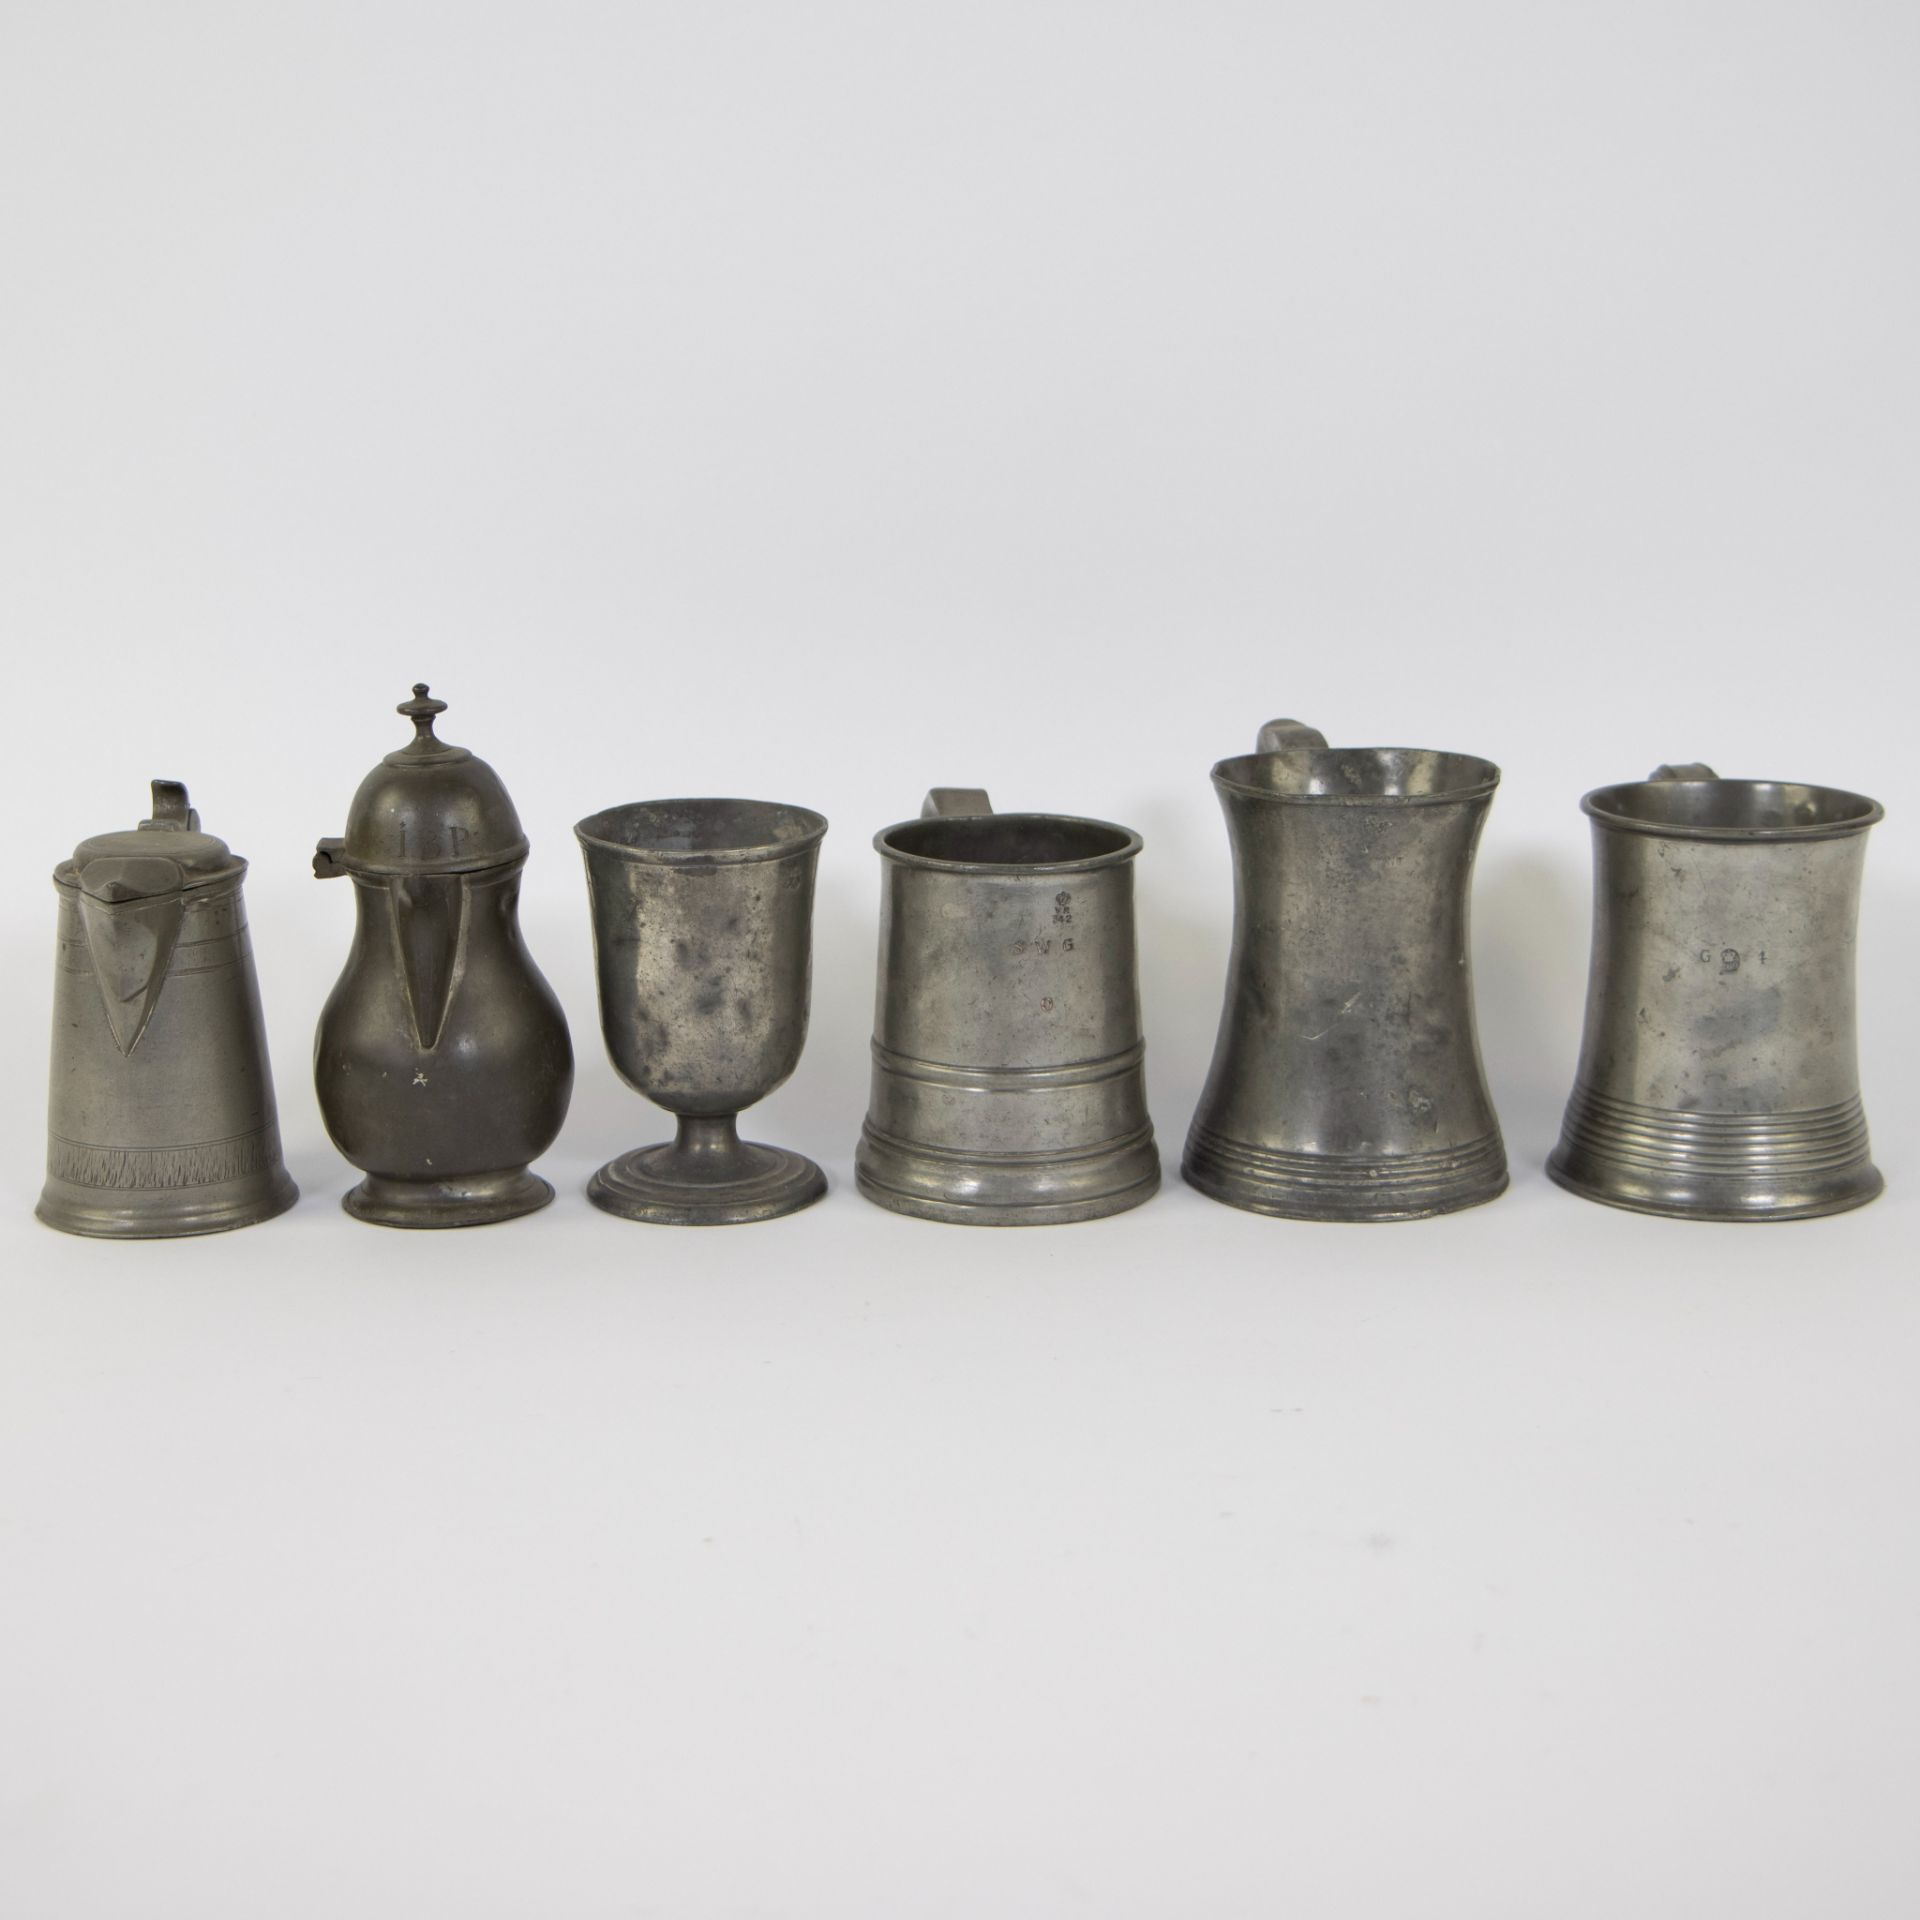 Large collection of pewter pitchers and beer pots, 18th/19th century - Image 3 of 10